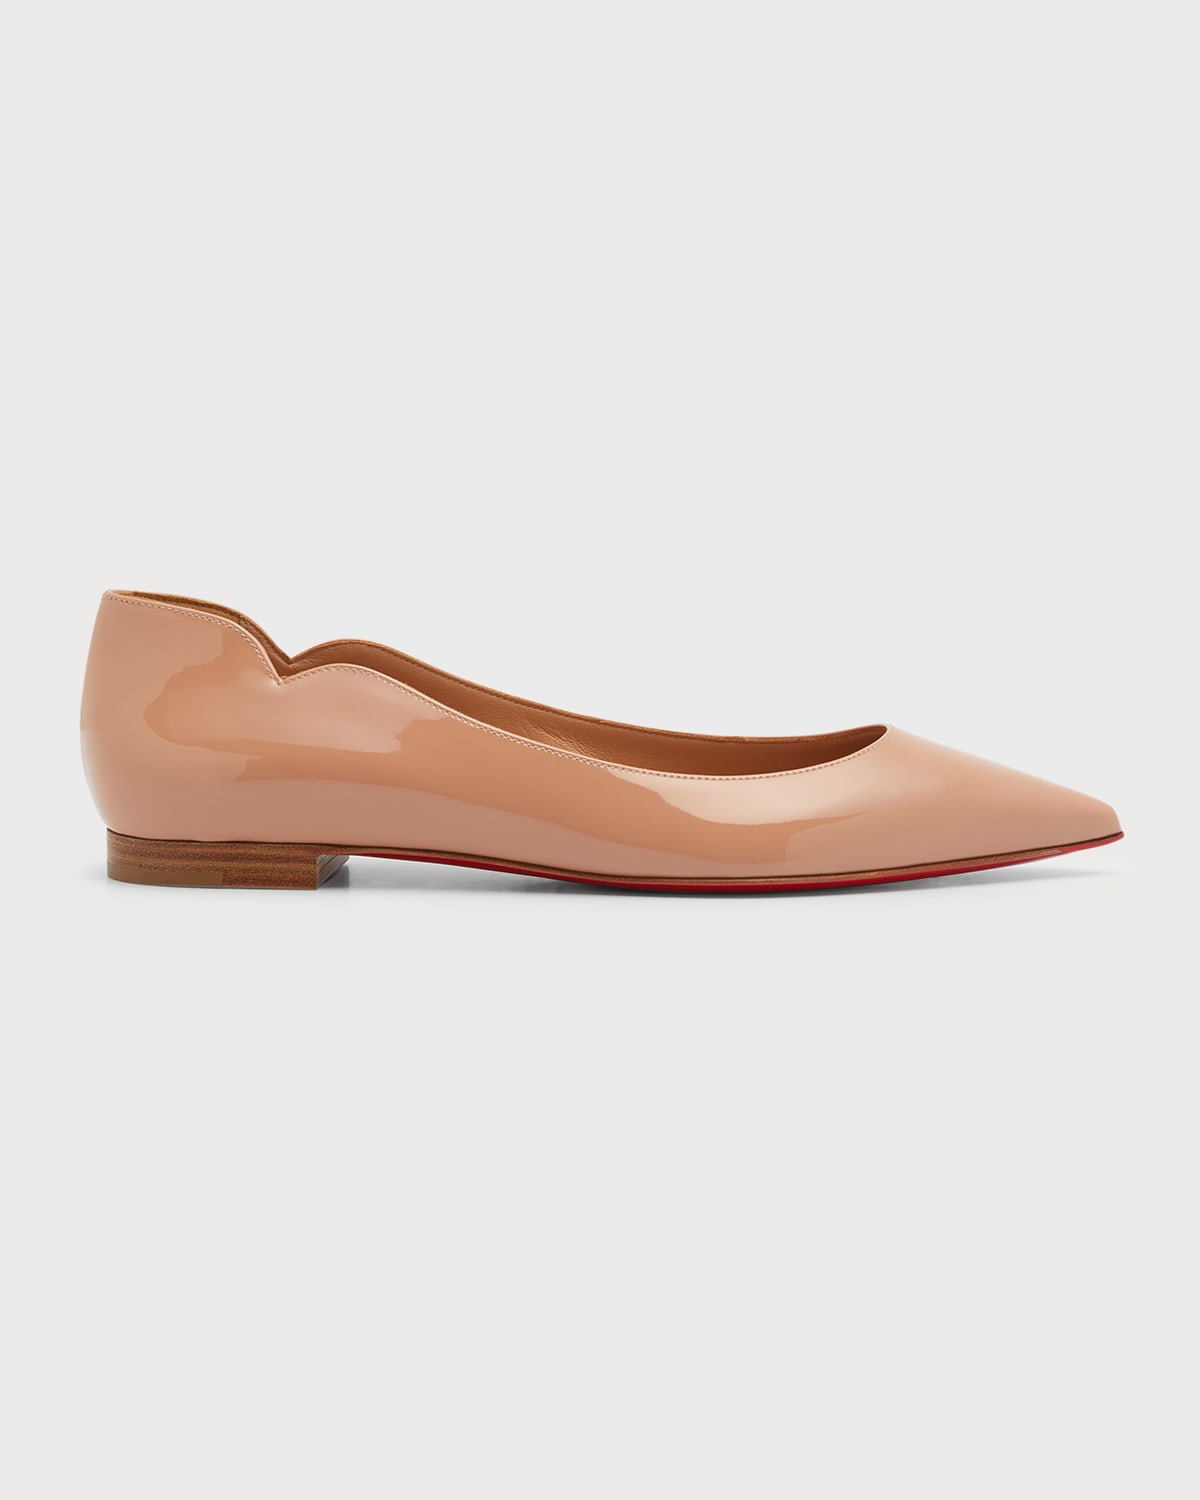 Hot Chickita Patent Red Sole Ballerina Flats